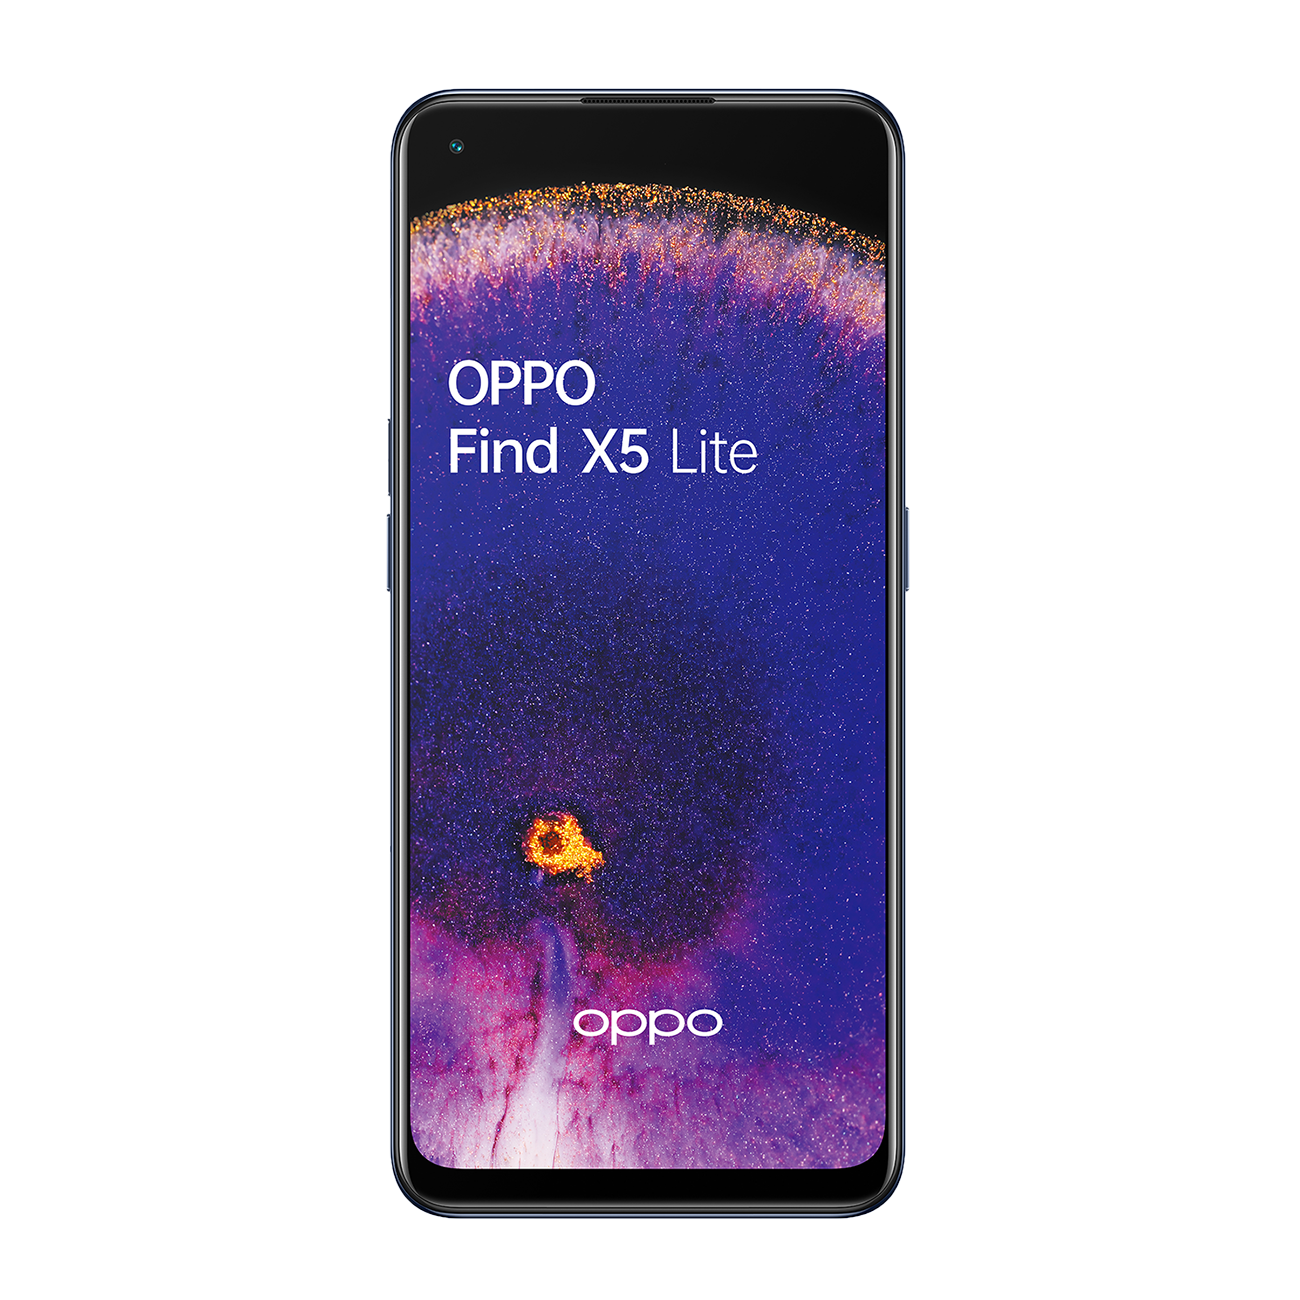 Oppo Find X5 Lite: specs and price in Kenya